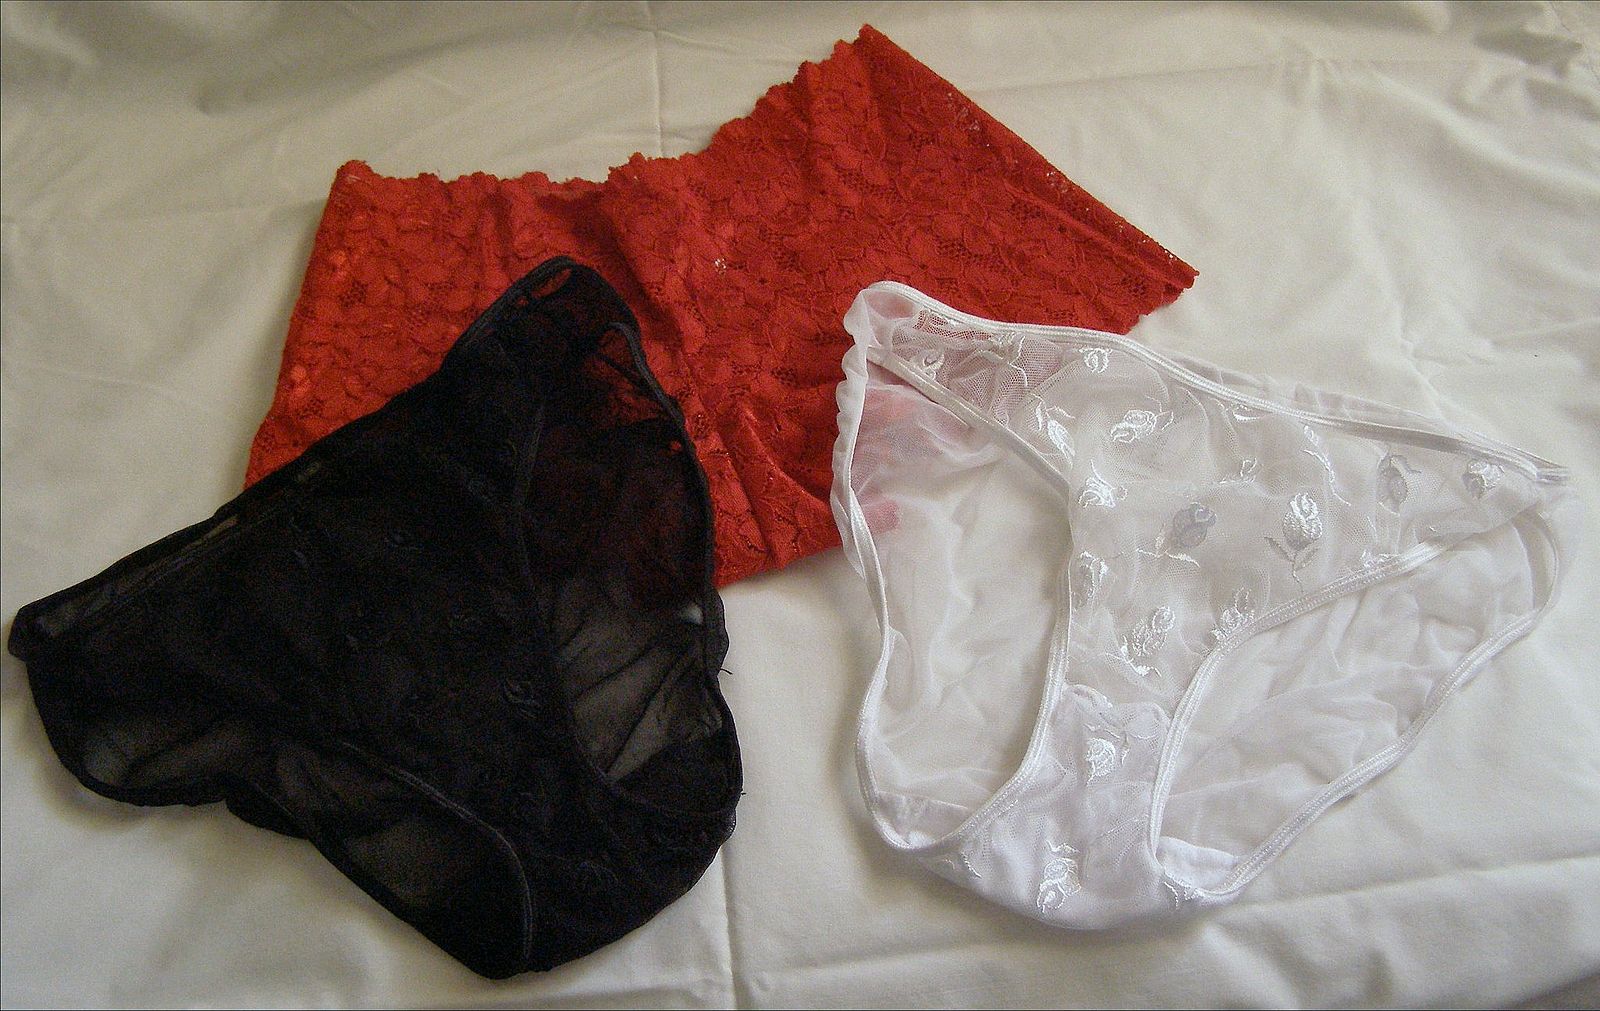 Popular Used Panty Selling Site Allthingsworn Review 